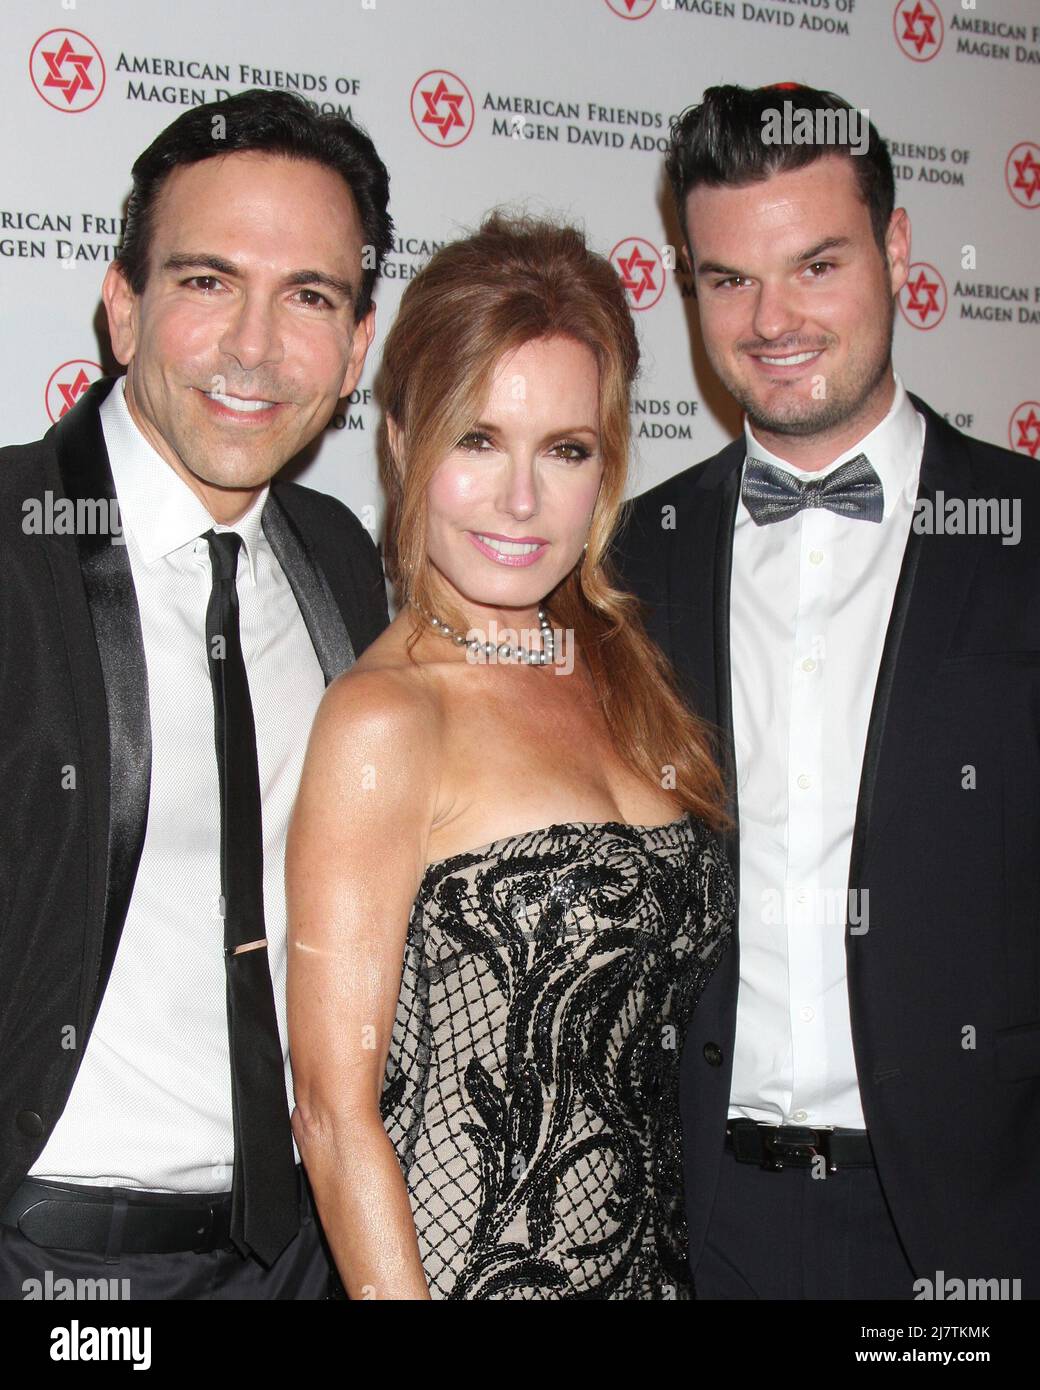 LOS ANGELES - OCT 23:  William Dorfman, Tracey Bregman, Austin Recht at the American Friends of Magen David Adom’s Red Star Ball at Beverly Hilton Hotel on October 23, 2014 in Beverly Hills, CA Stock Photo